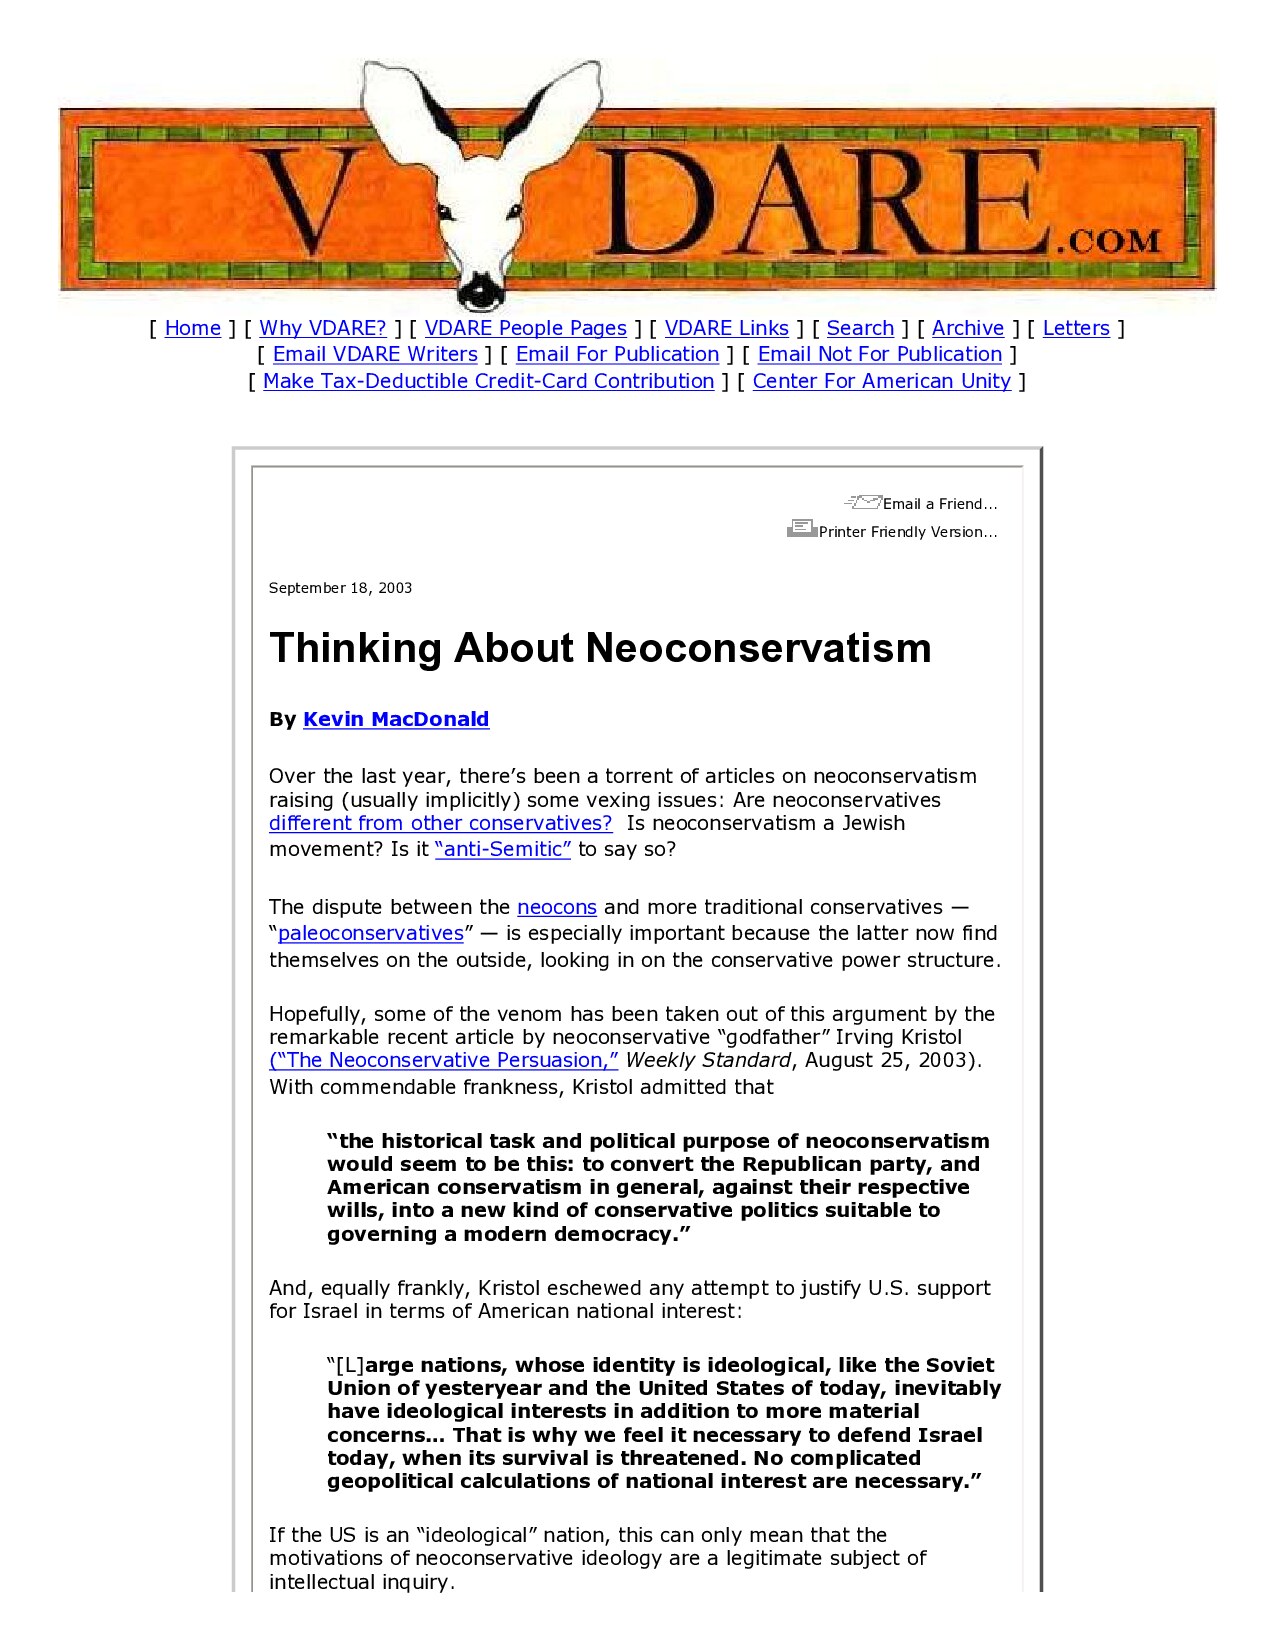 VDARE.com: 09/18/03 - Thinking About Neoconservatism